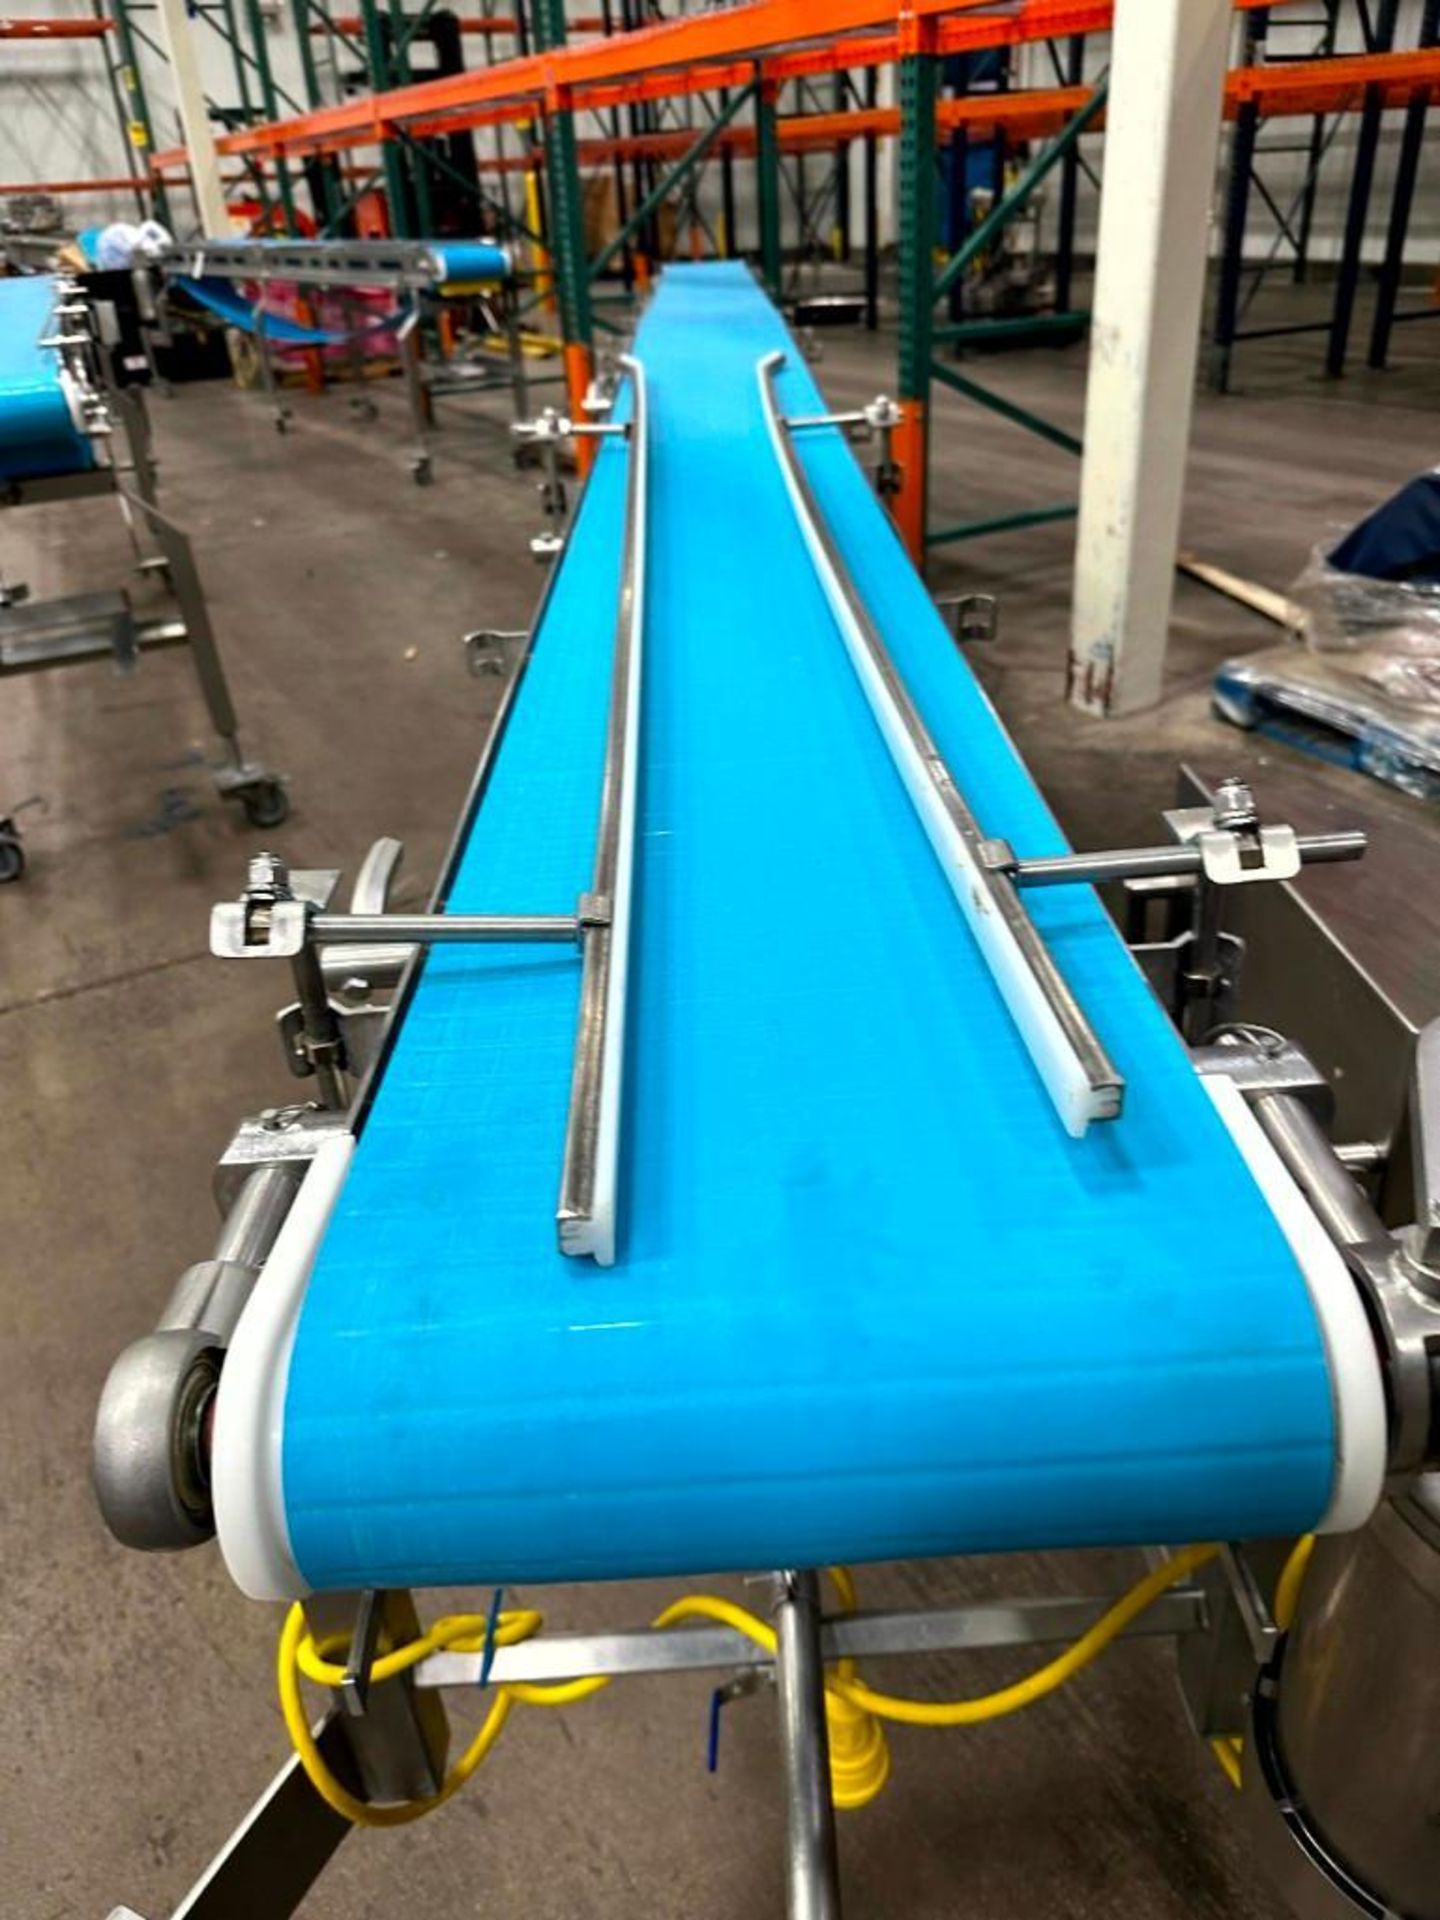 F.E.M.C STAINLESS STEEL FRAME PLASTIC CONVEYOR - Image 4 of 7